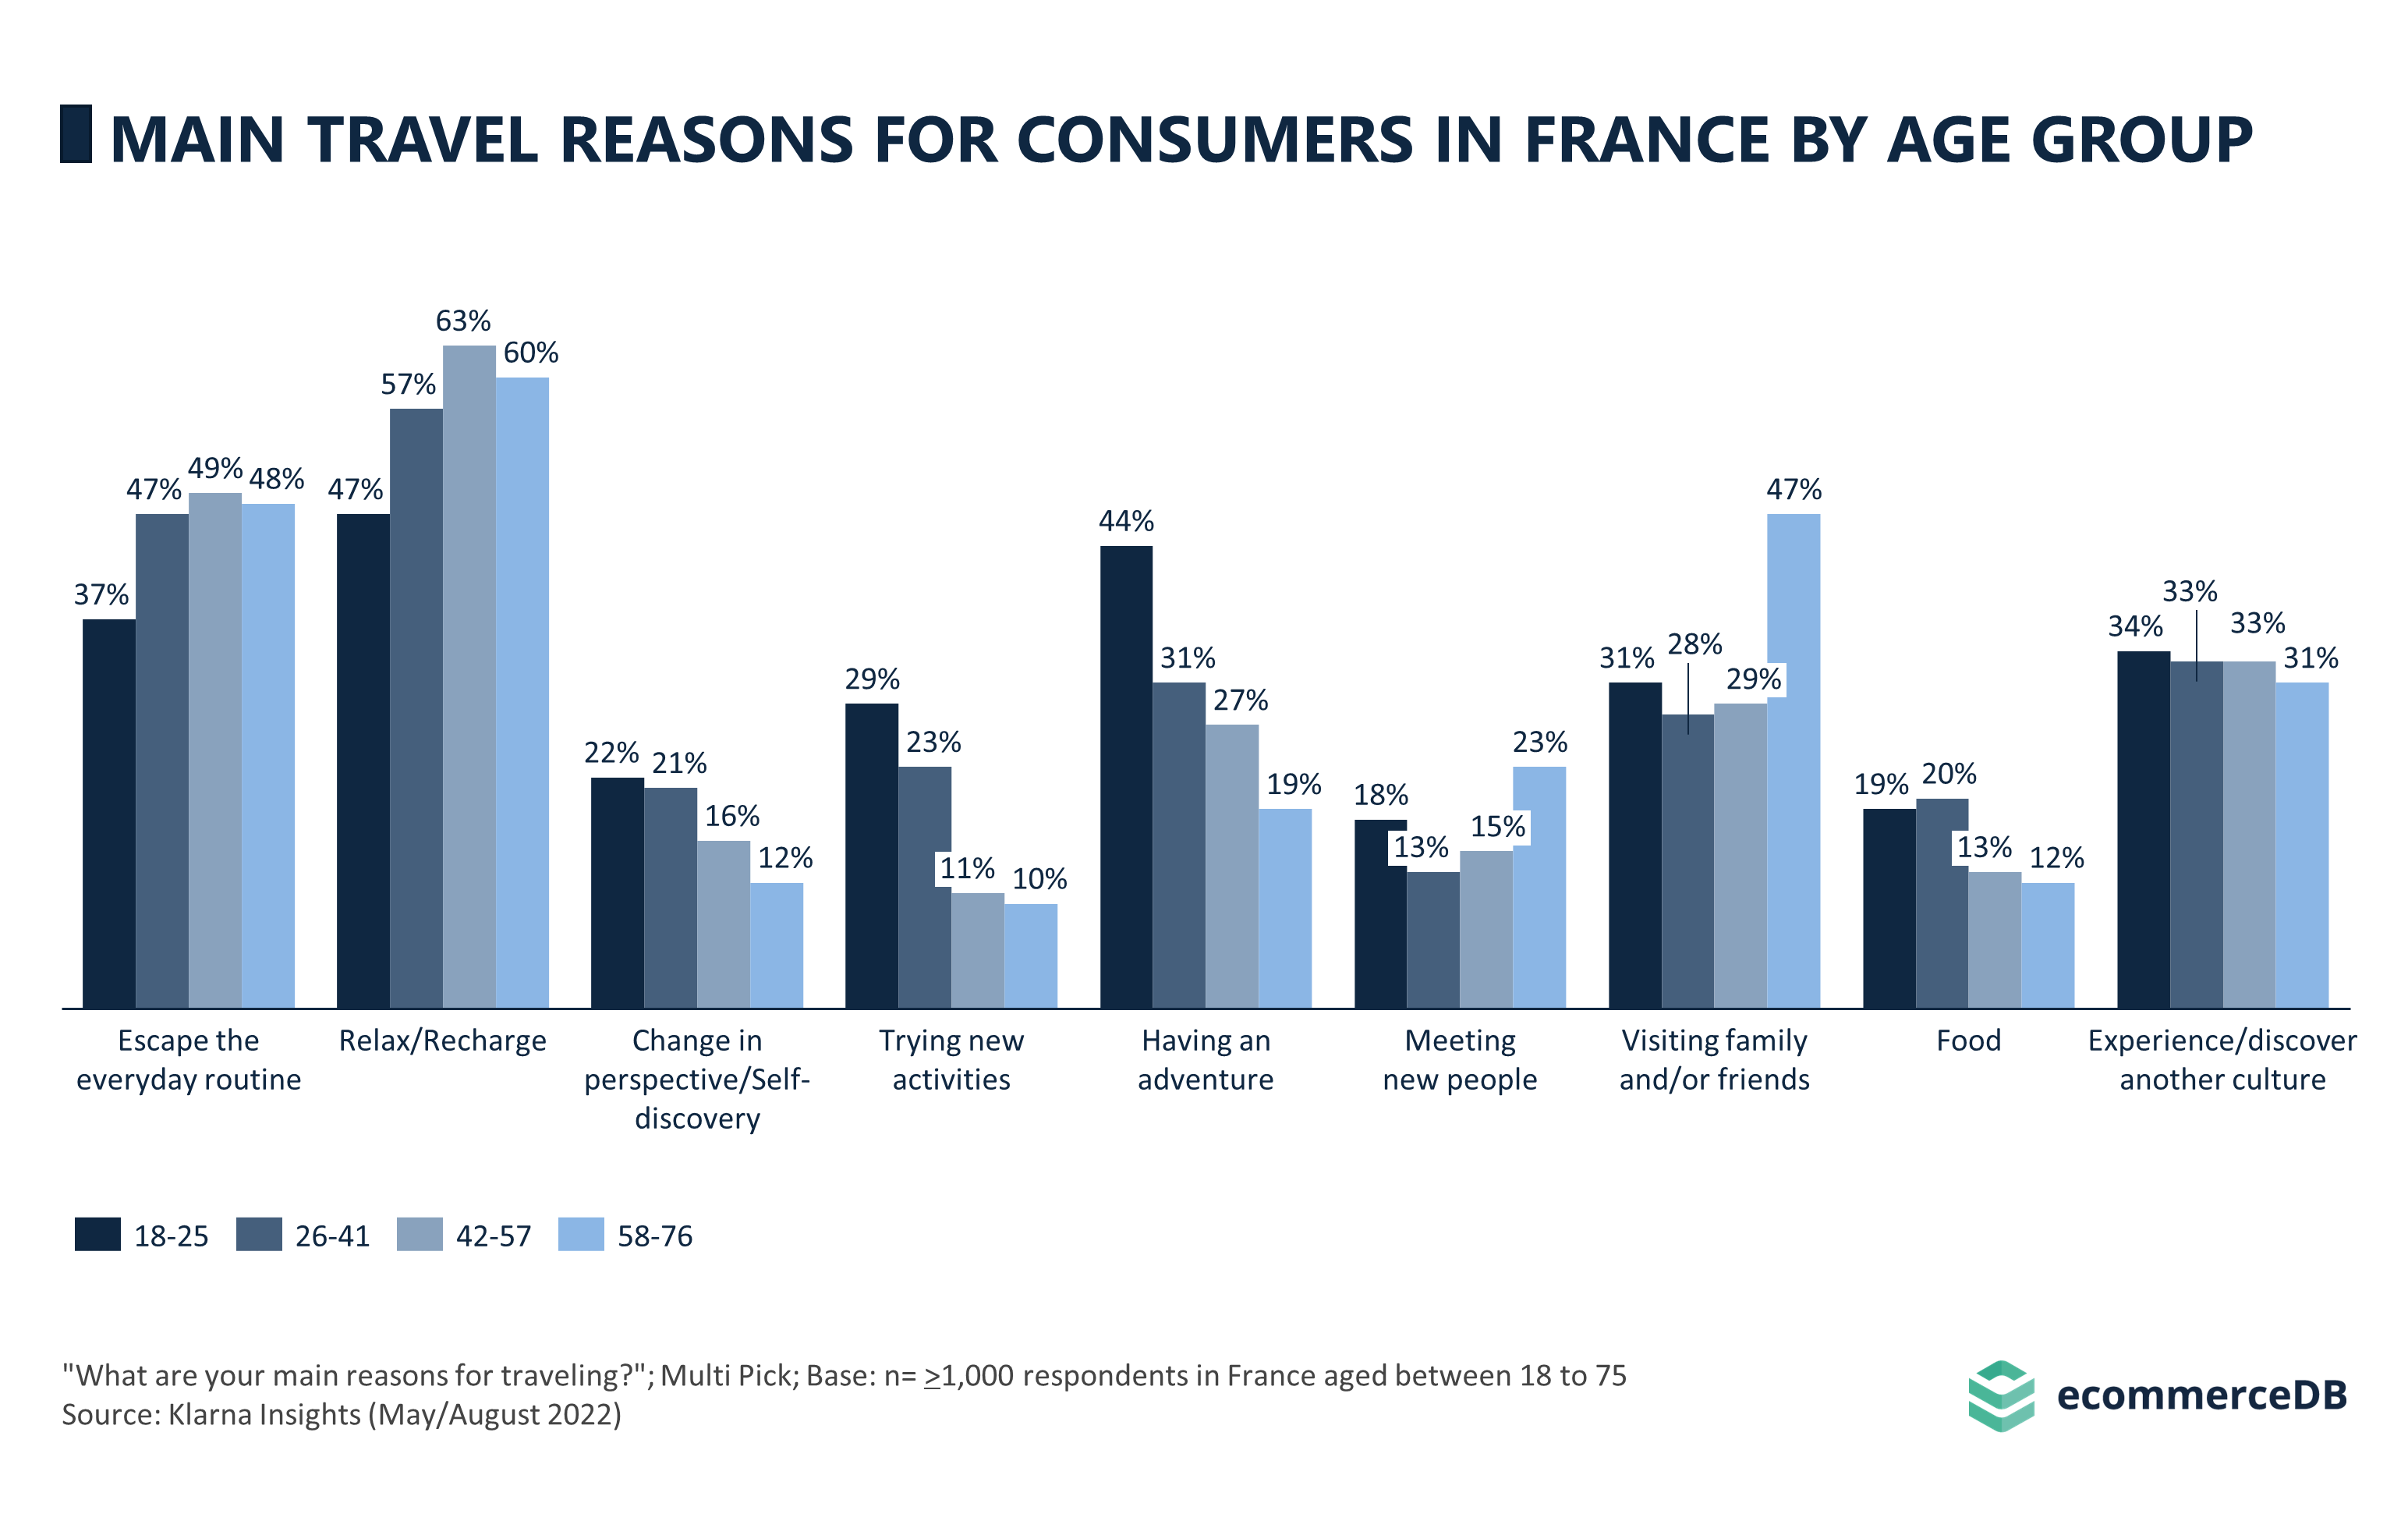 Main Travel Reasons for Consumers in France by Age Group (Bar Chart)